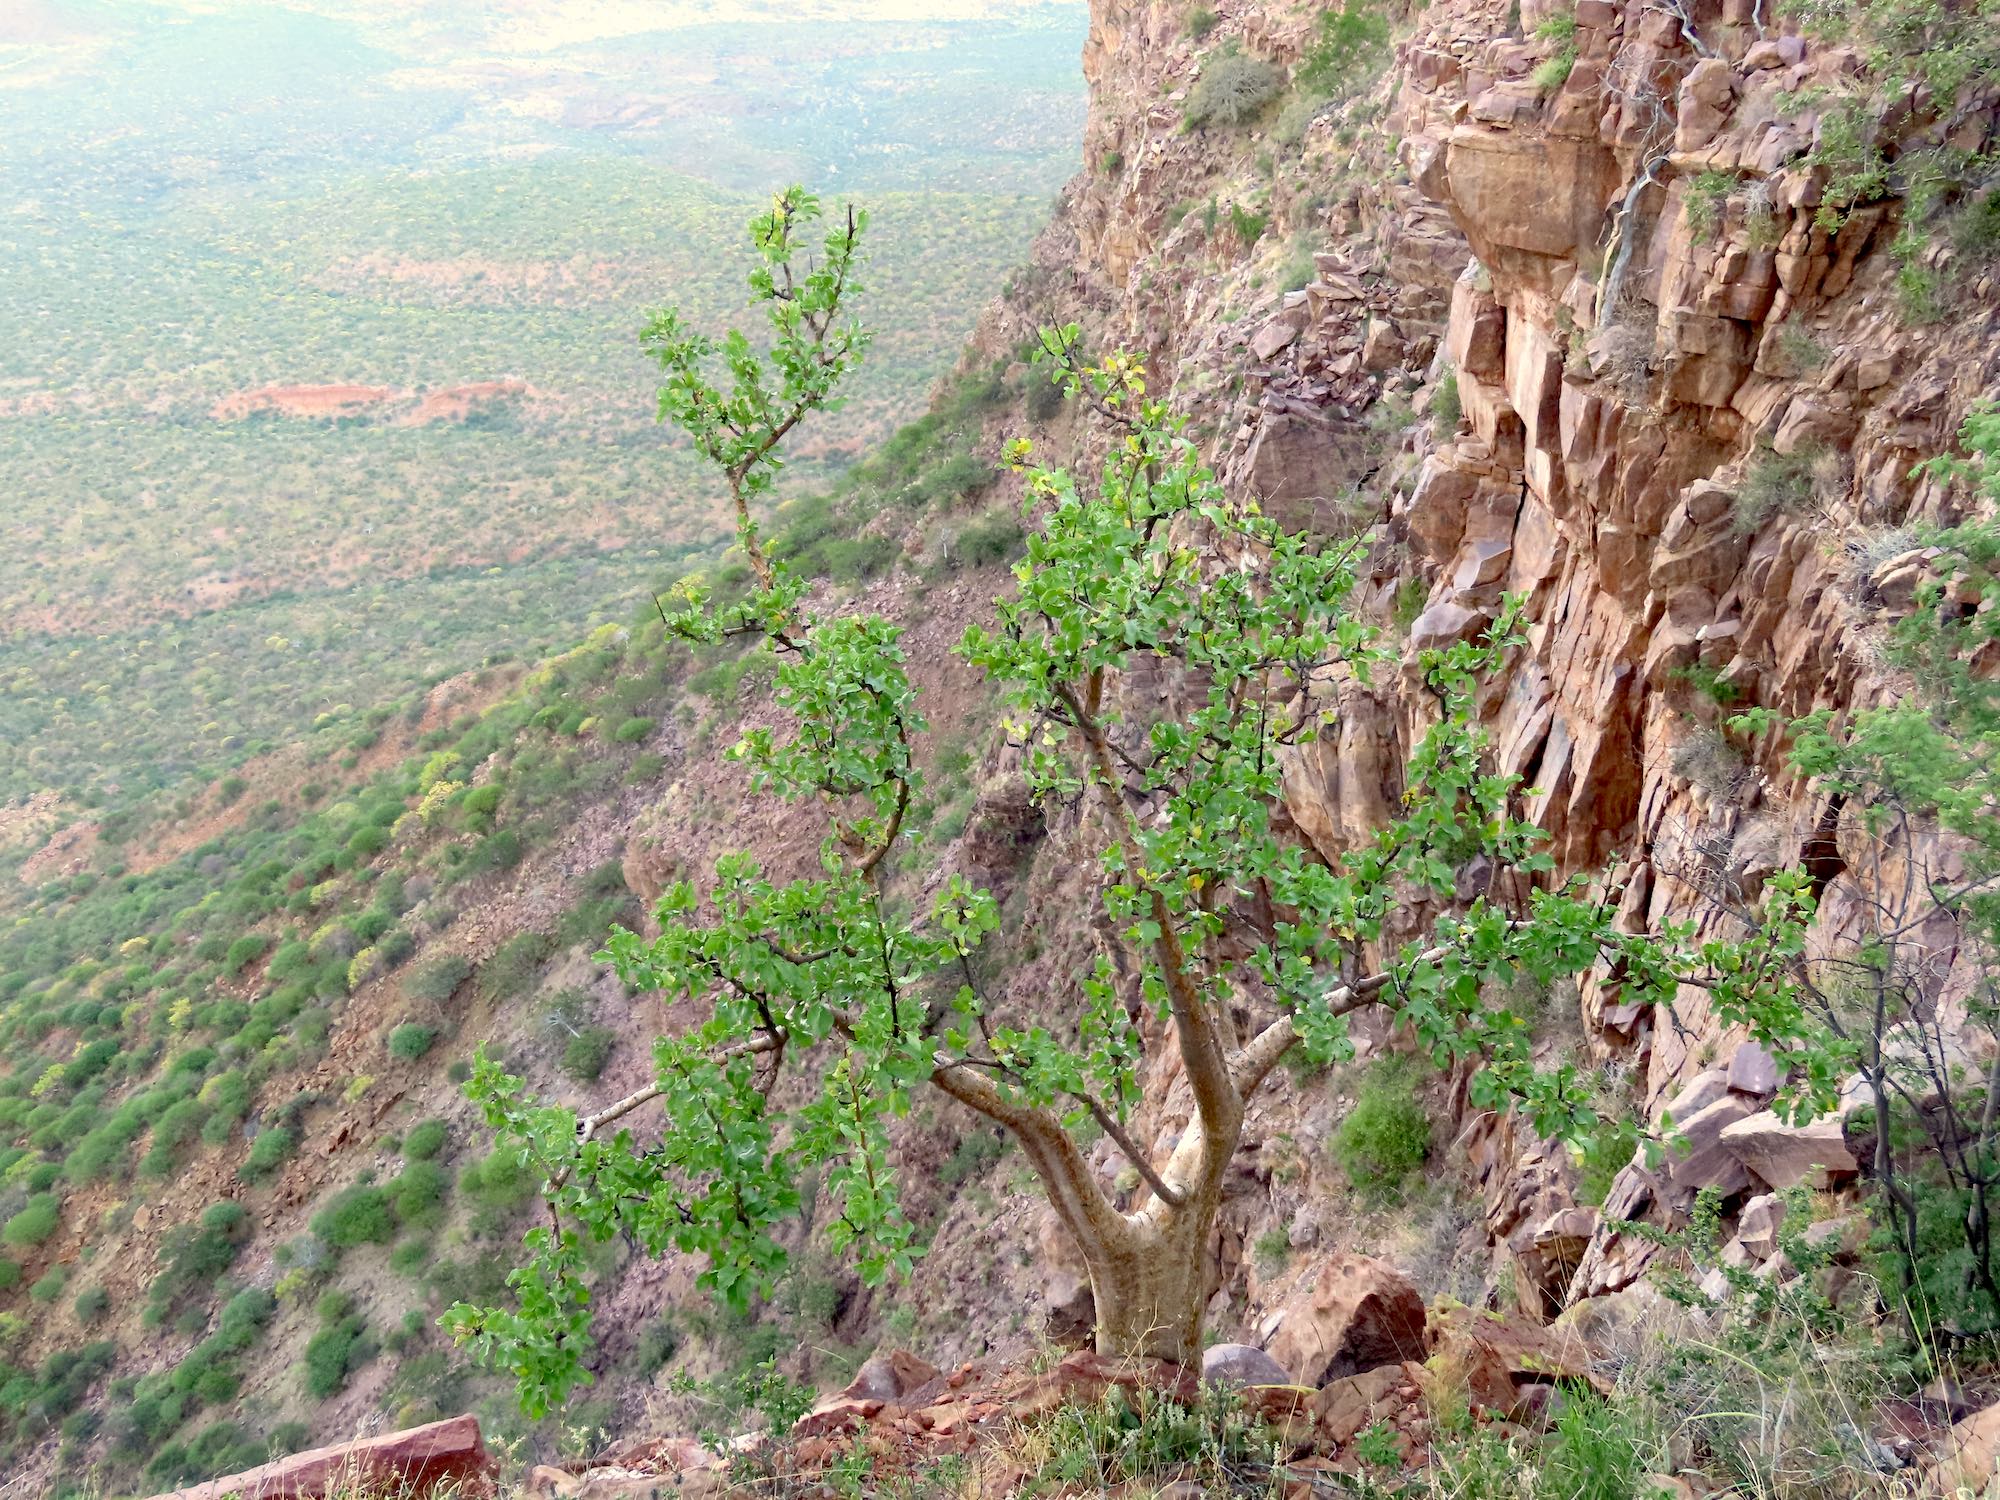 A green leafed tree clings to a steep rock face.